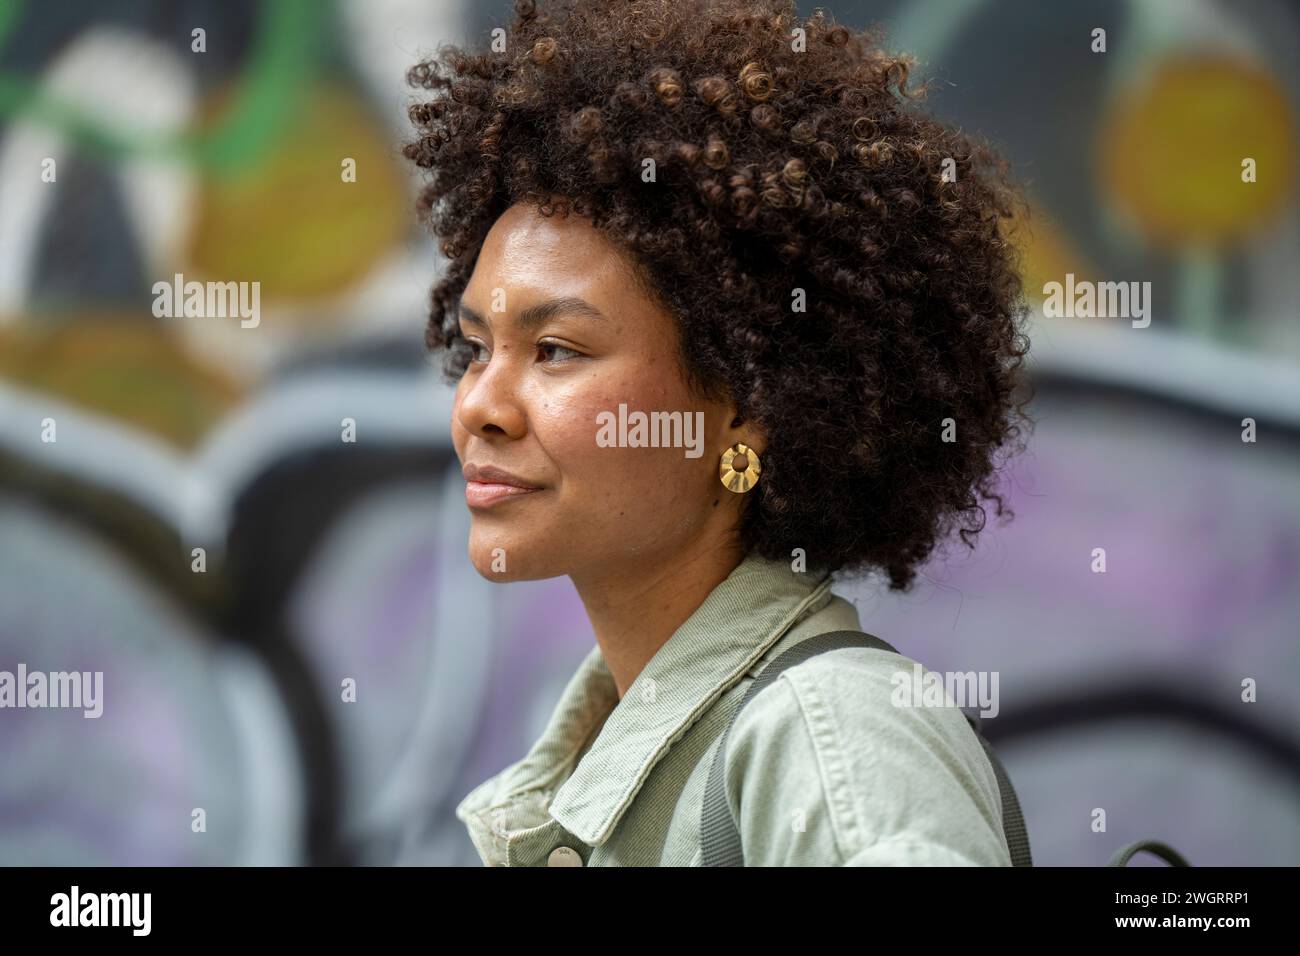 Trendy young mixed race African woman walking through town happy. Stock Photo